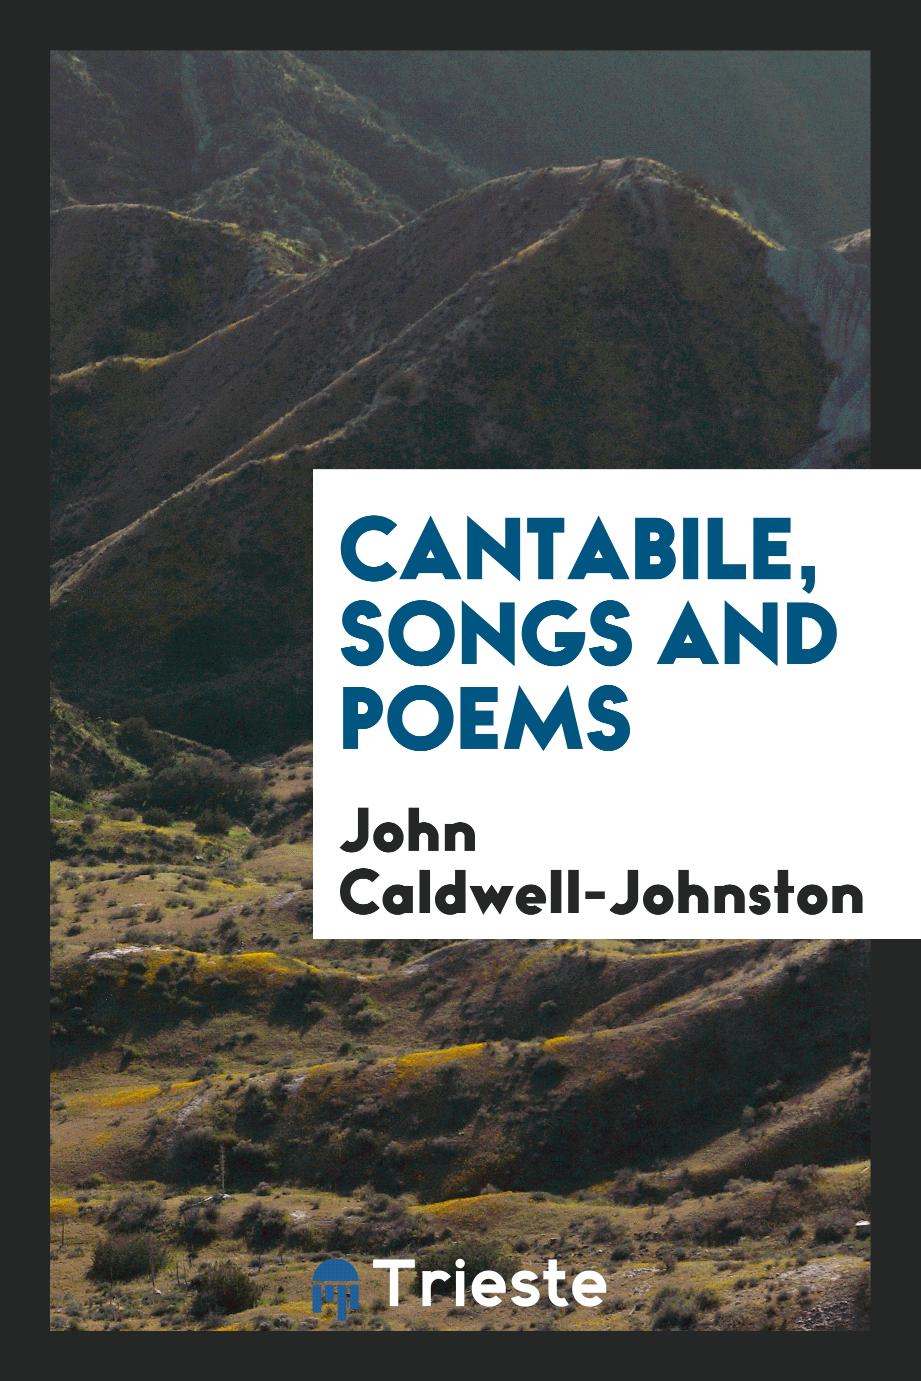 Cantabile, songs and poems